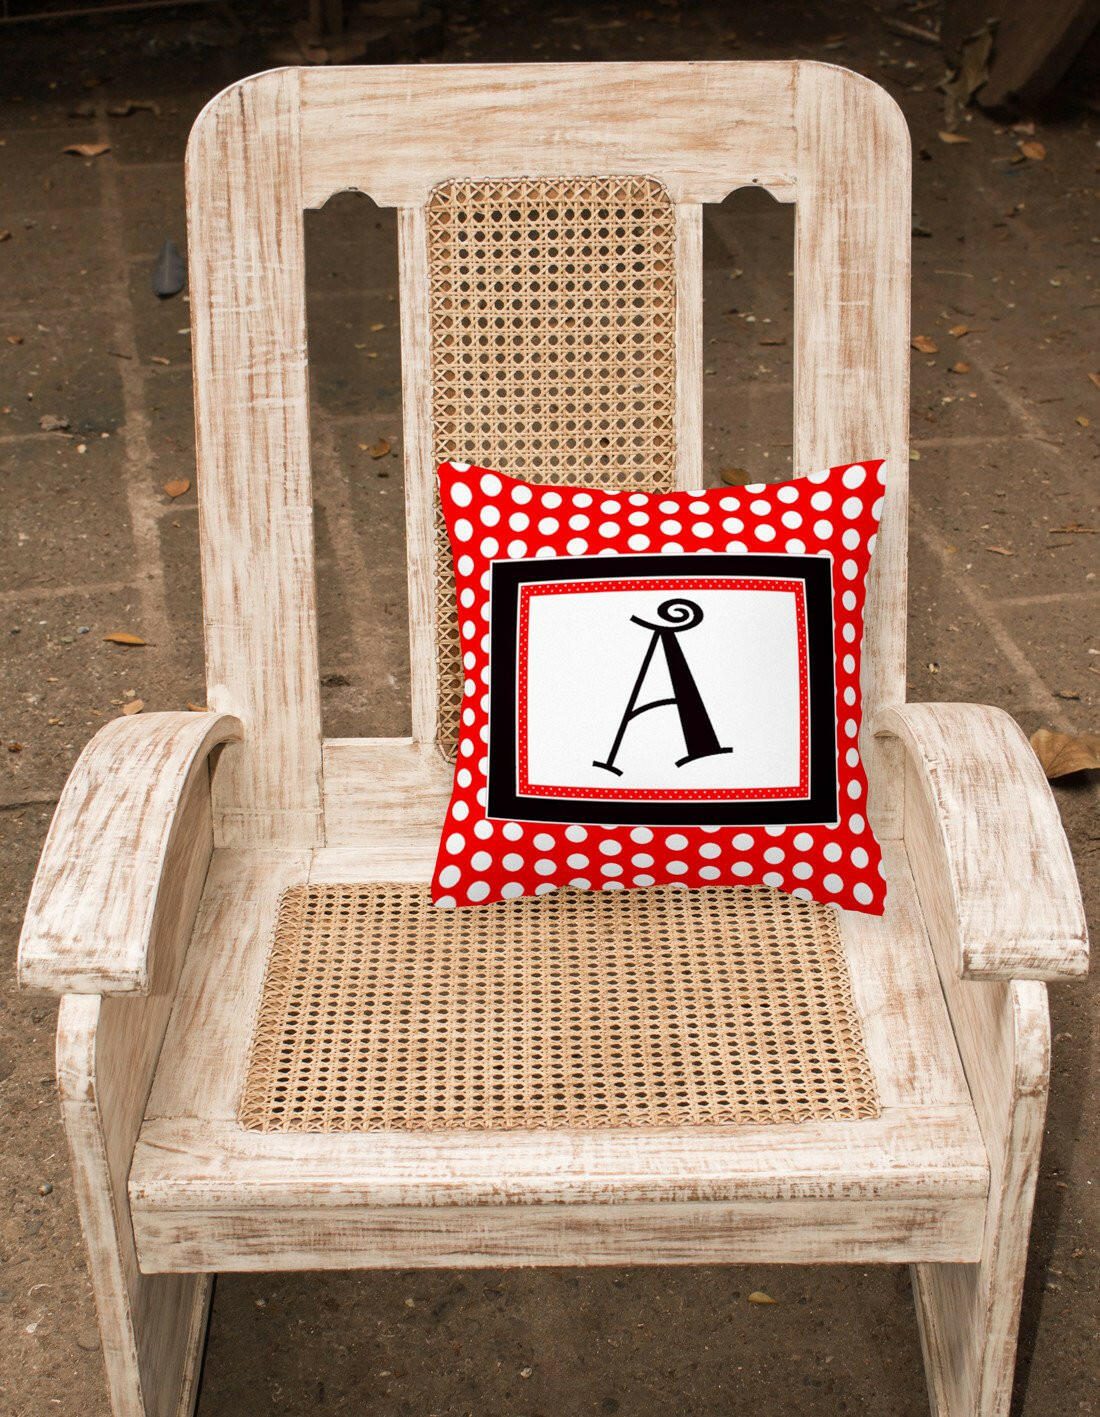 Letter A Monogram - Red and Black Polka Dots Fabric Decorative Pillow CJ1012-APW1414 - the-store.com